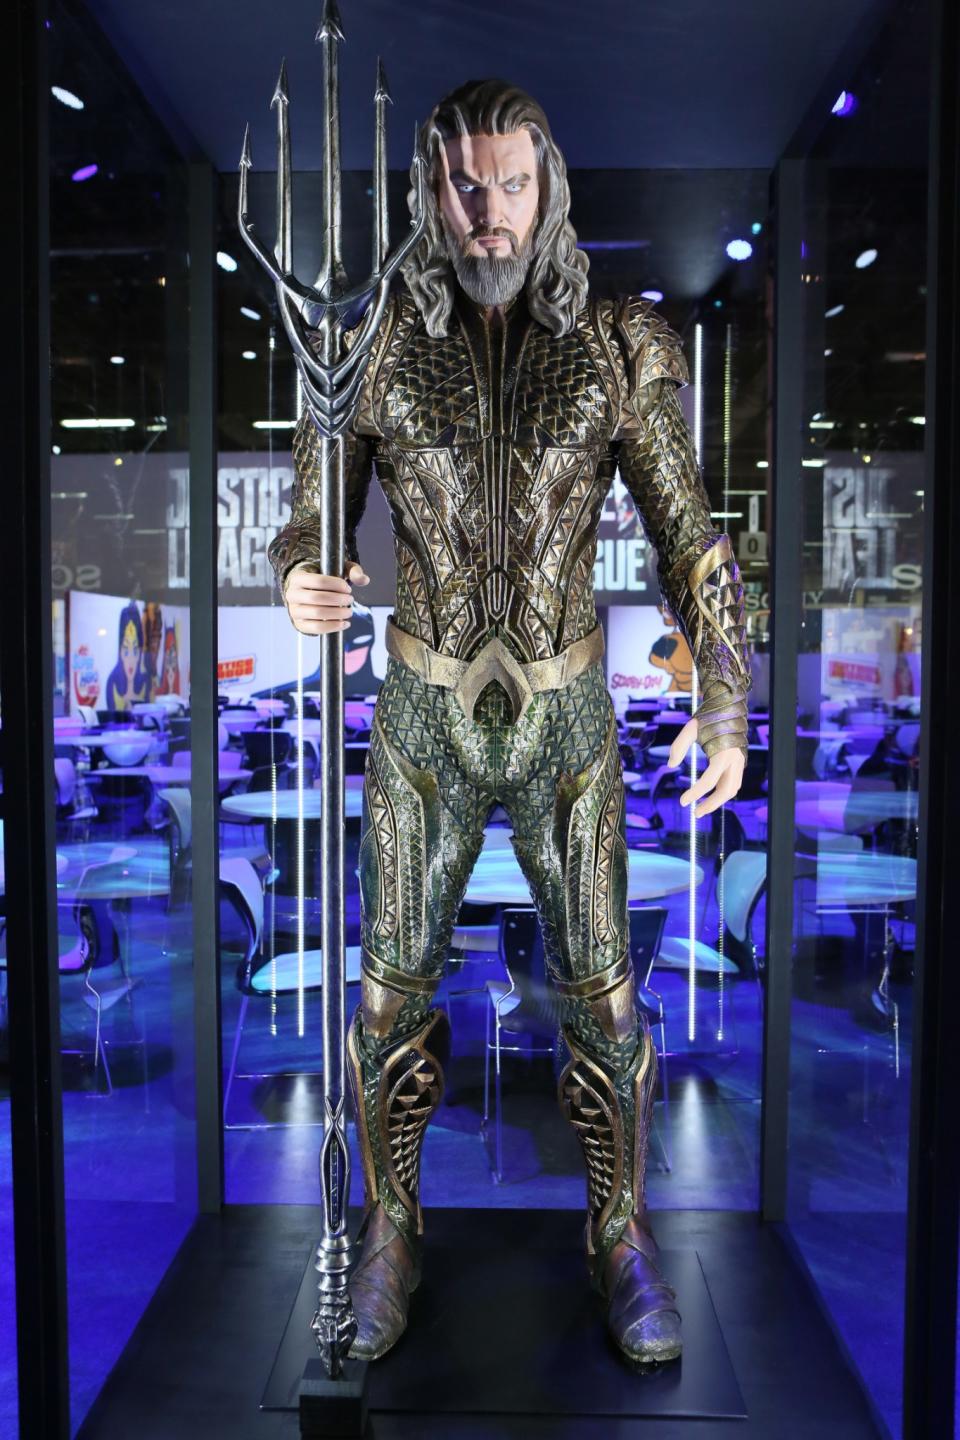 <p>Our best look yet at the sea king’s Atlantean armor featuring the iconic “A” belt buckle and the golden/green color scheme from the comics. Don’t get on the business end of that trident, er, <em>quintdent</em>. (Credit: Warner Bros.) </p>